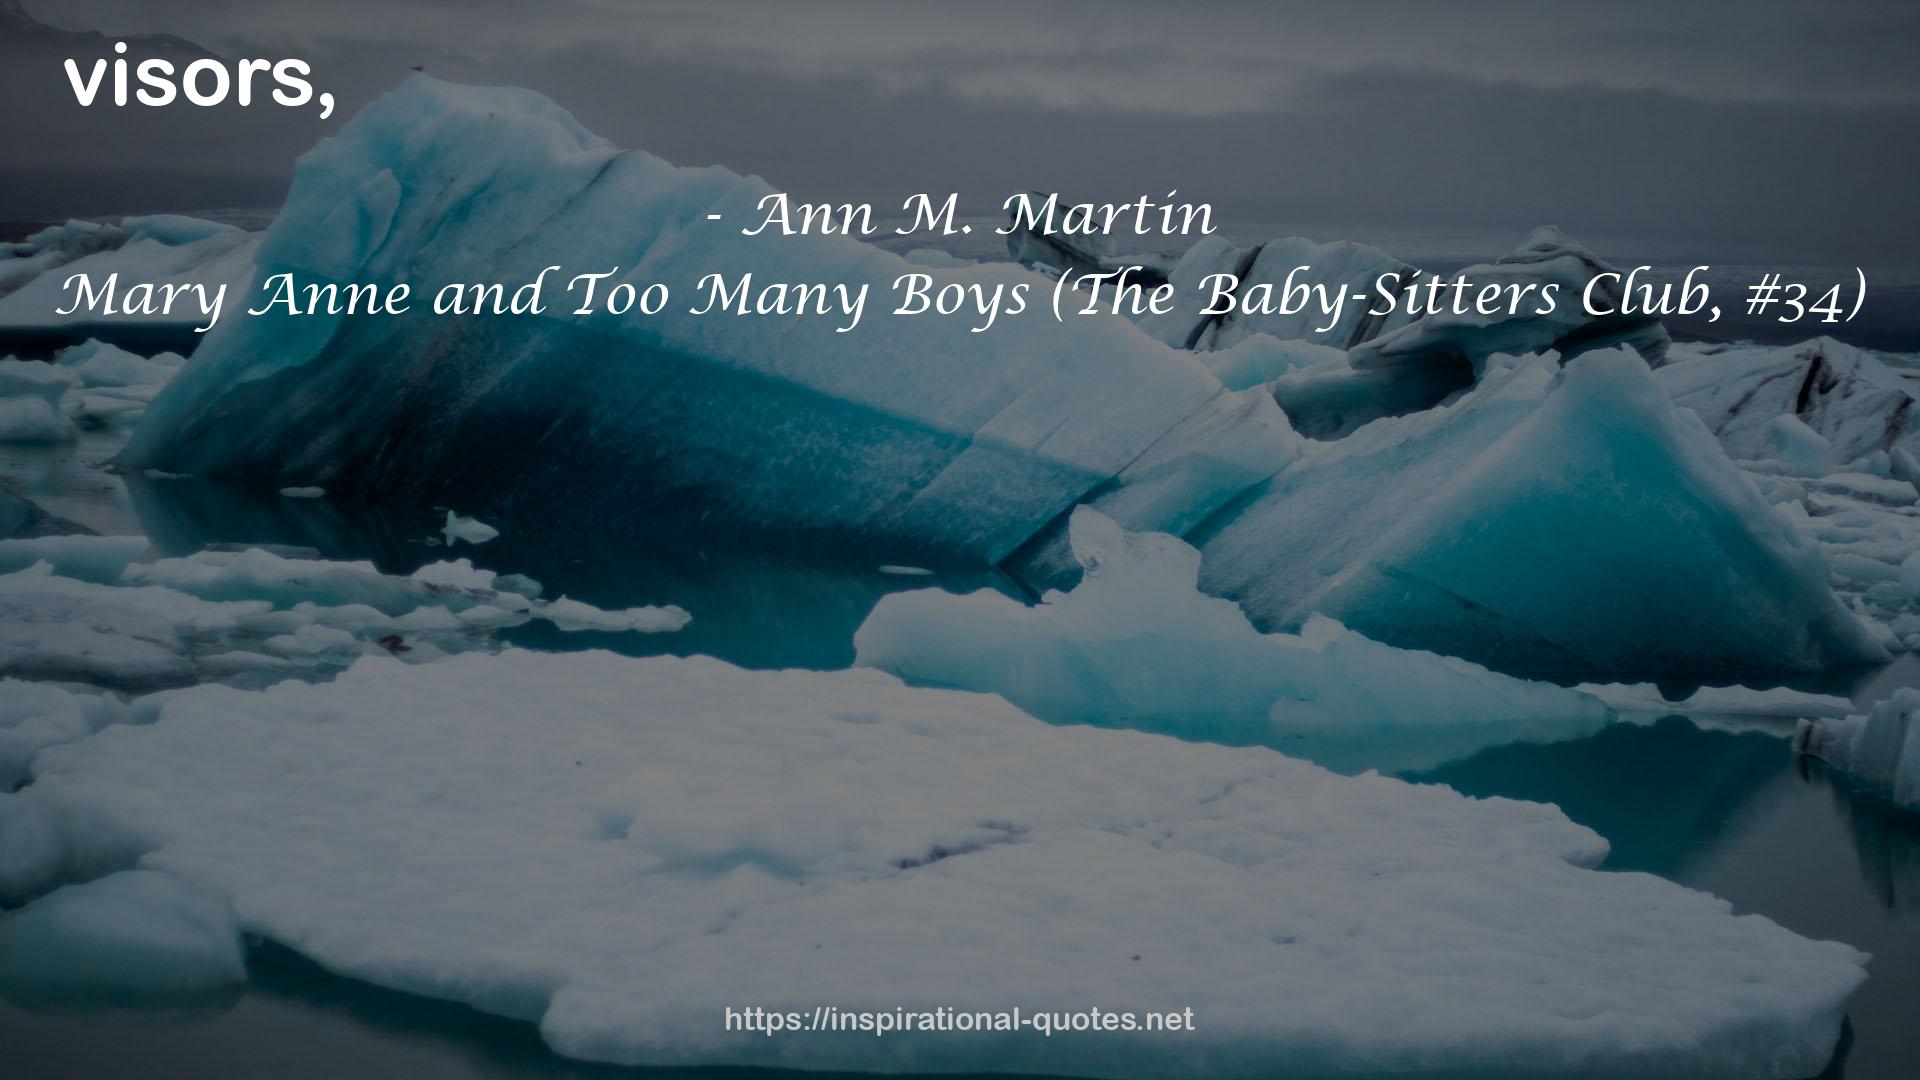 Mary Anne and Too Many Boys (The Baby-Sitters Club, #34) QUOTES